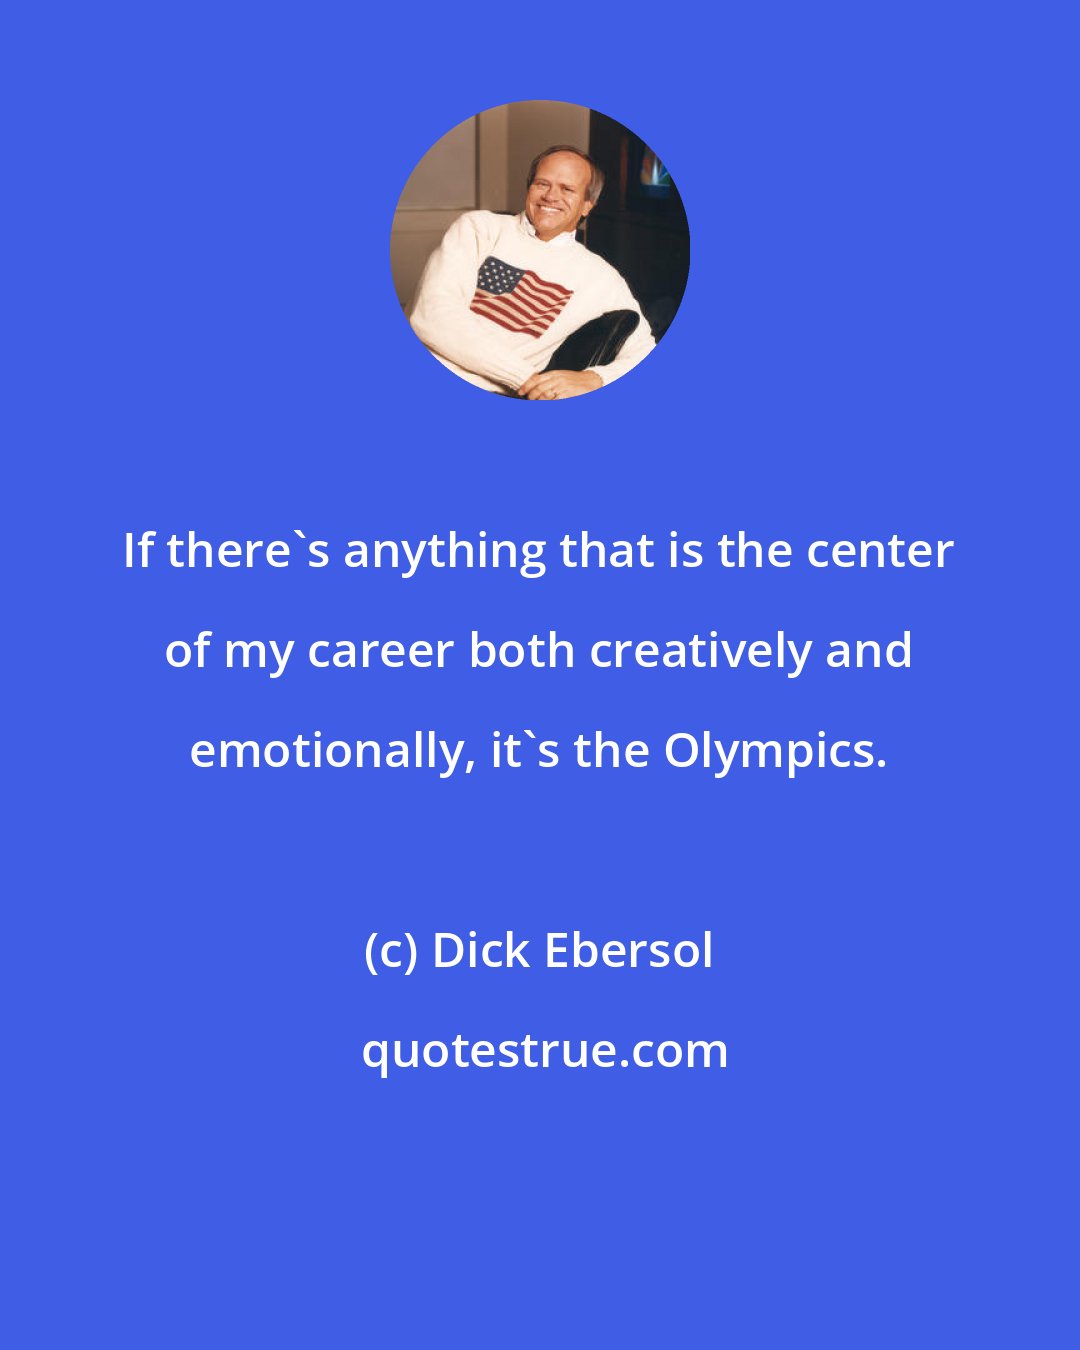 Dick Ebersol: If there's anything that is the center of my career both creatively and emotionally, it's the Olympics.